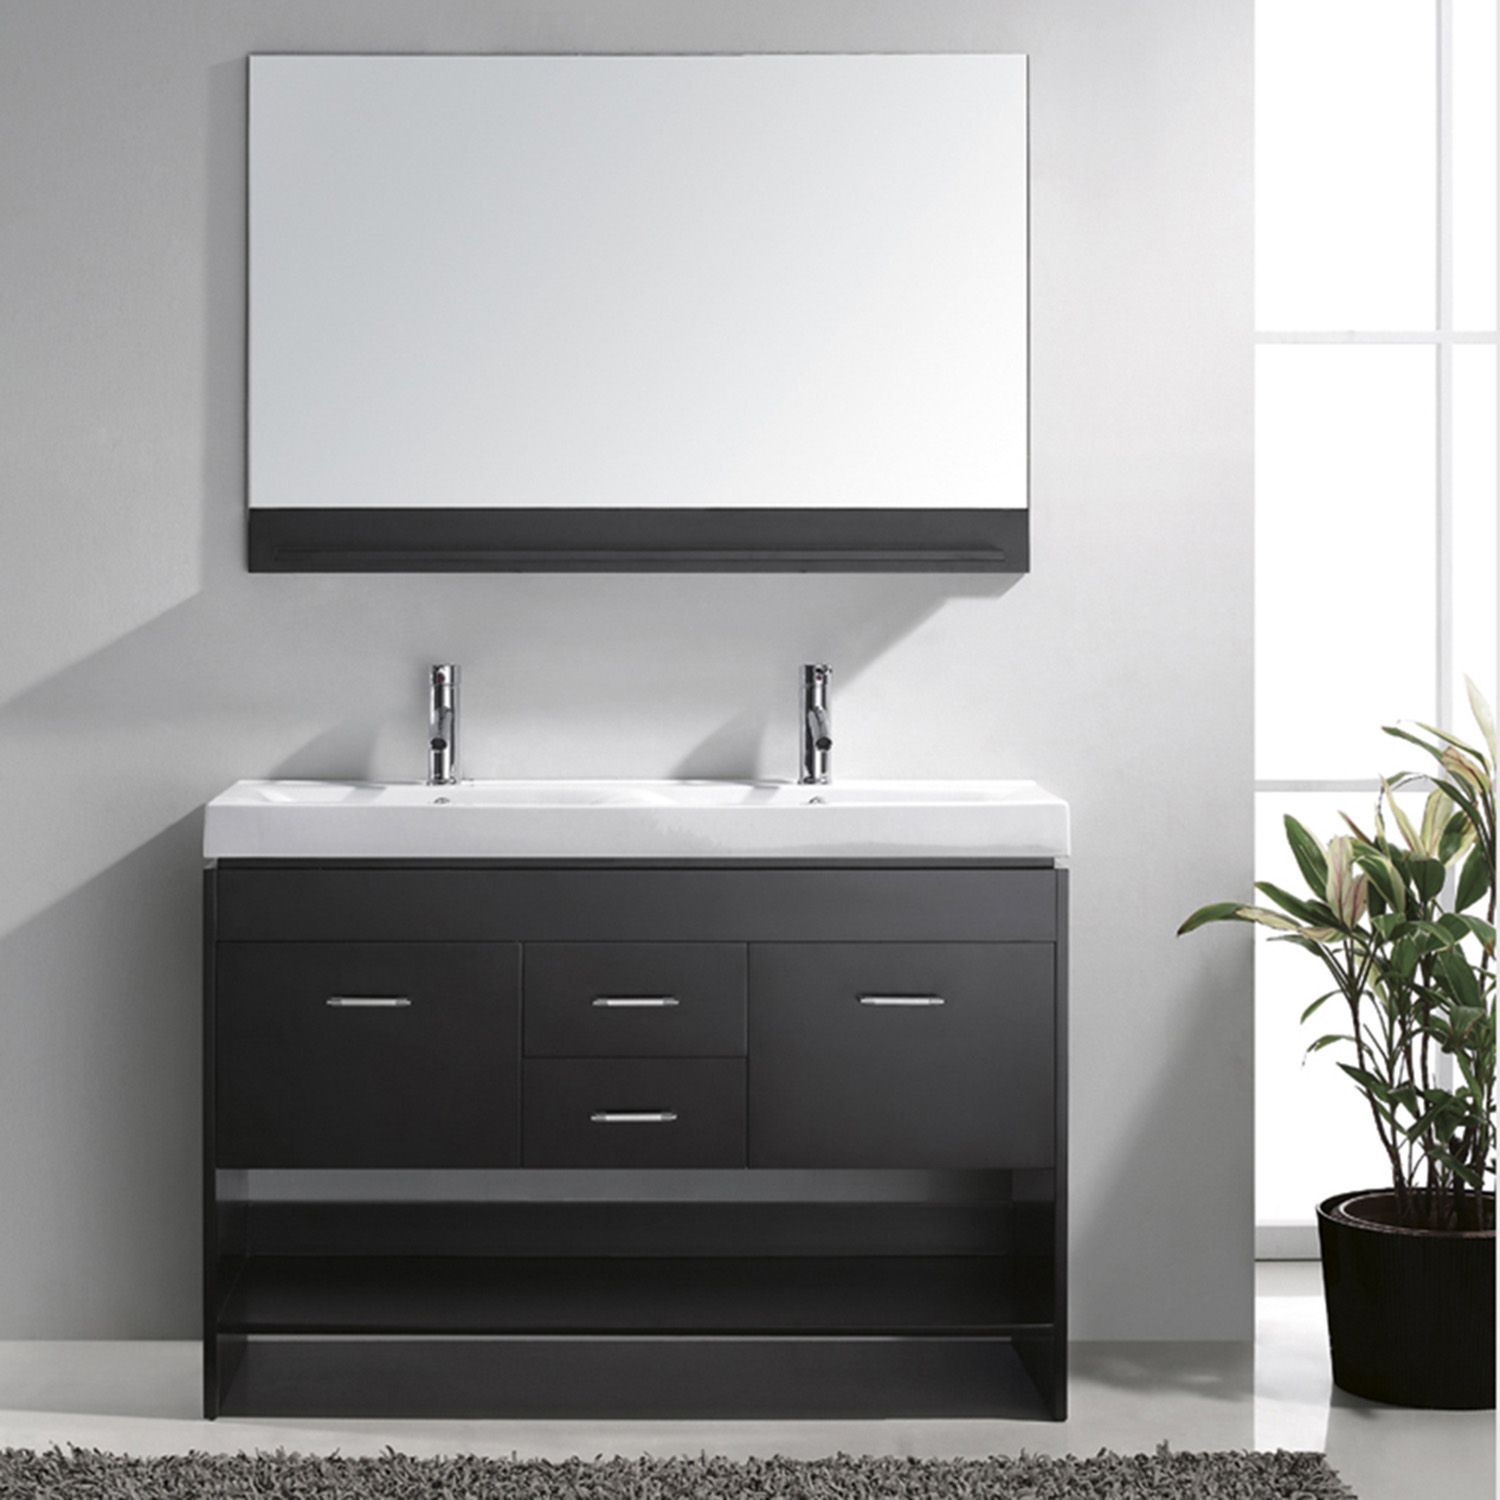 Should You Buy a Cheap or High Quality Bathroom Vanity?